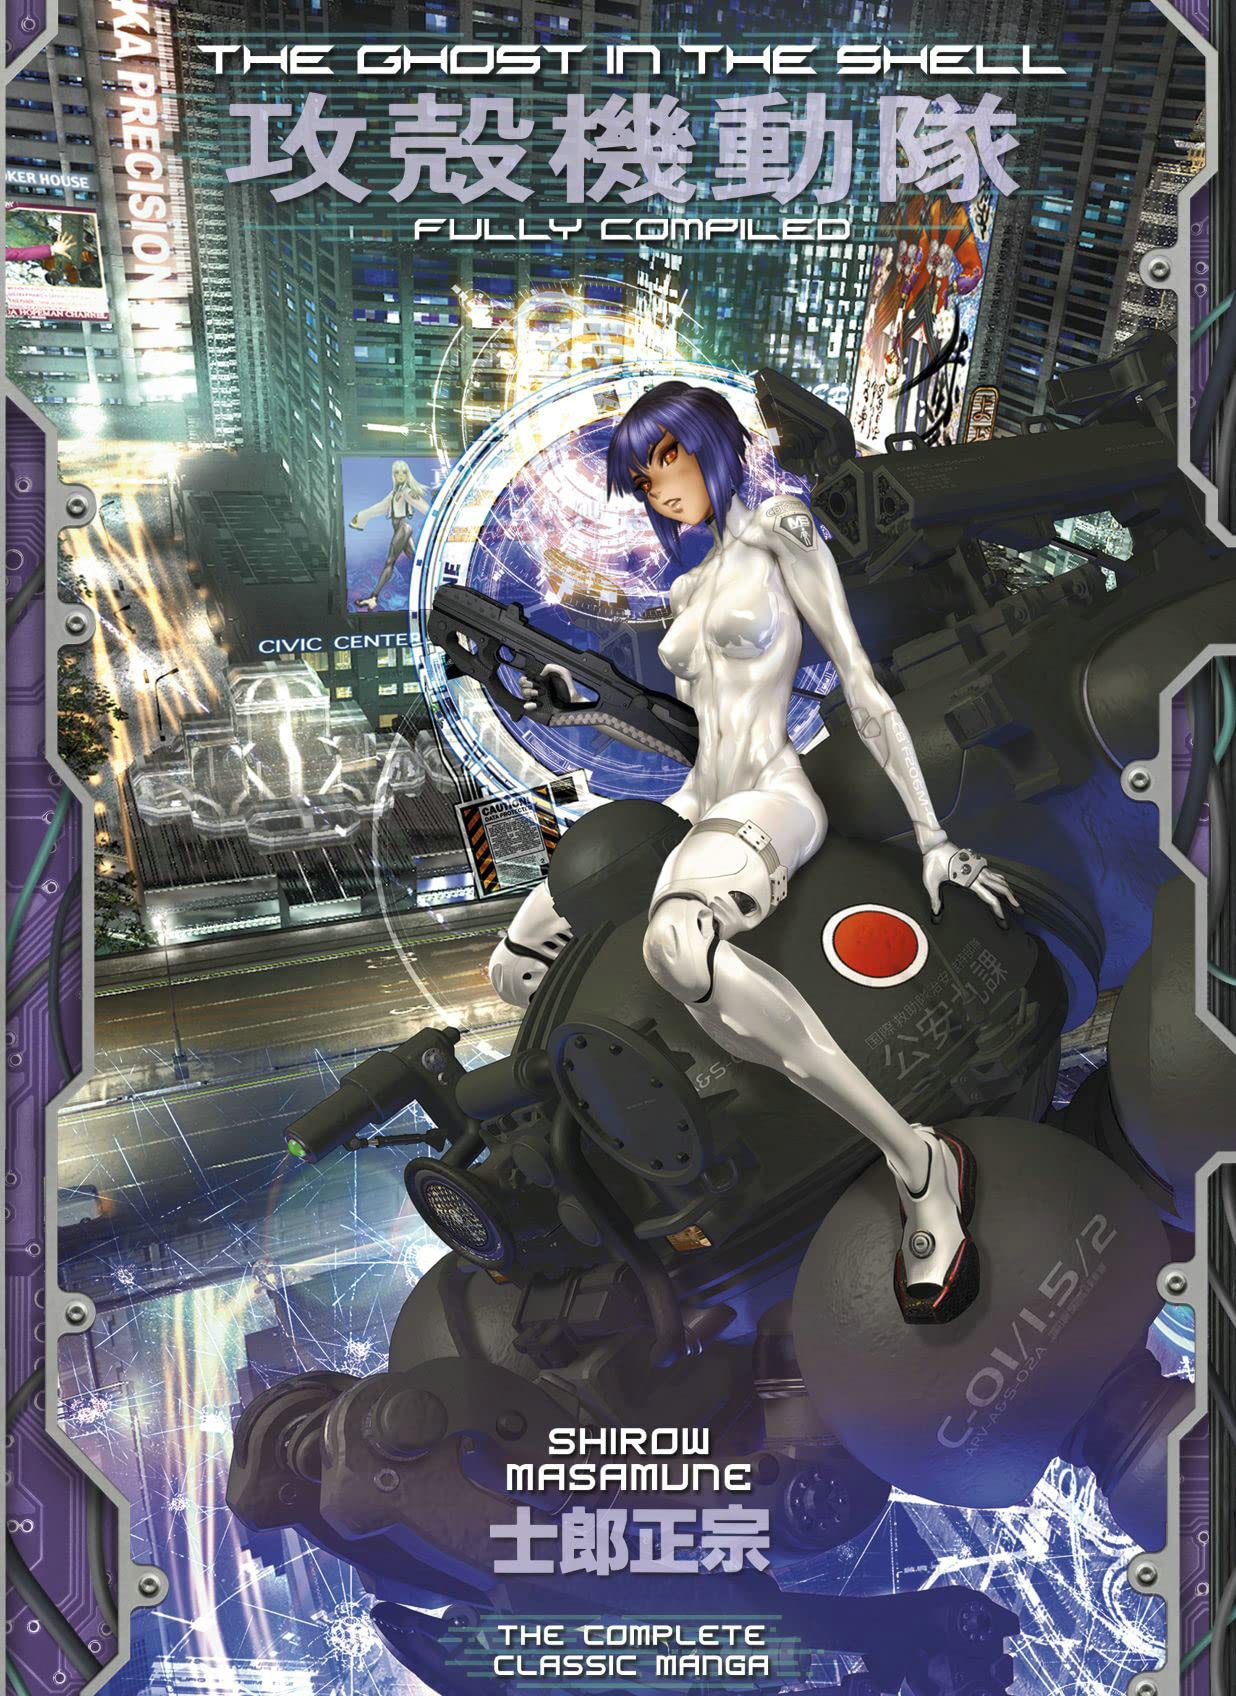 The Ghost in the Shell - Fully Compiled | Shirow Masamune